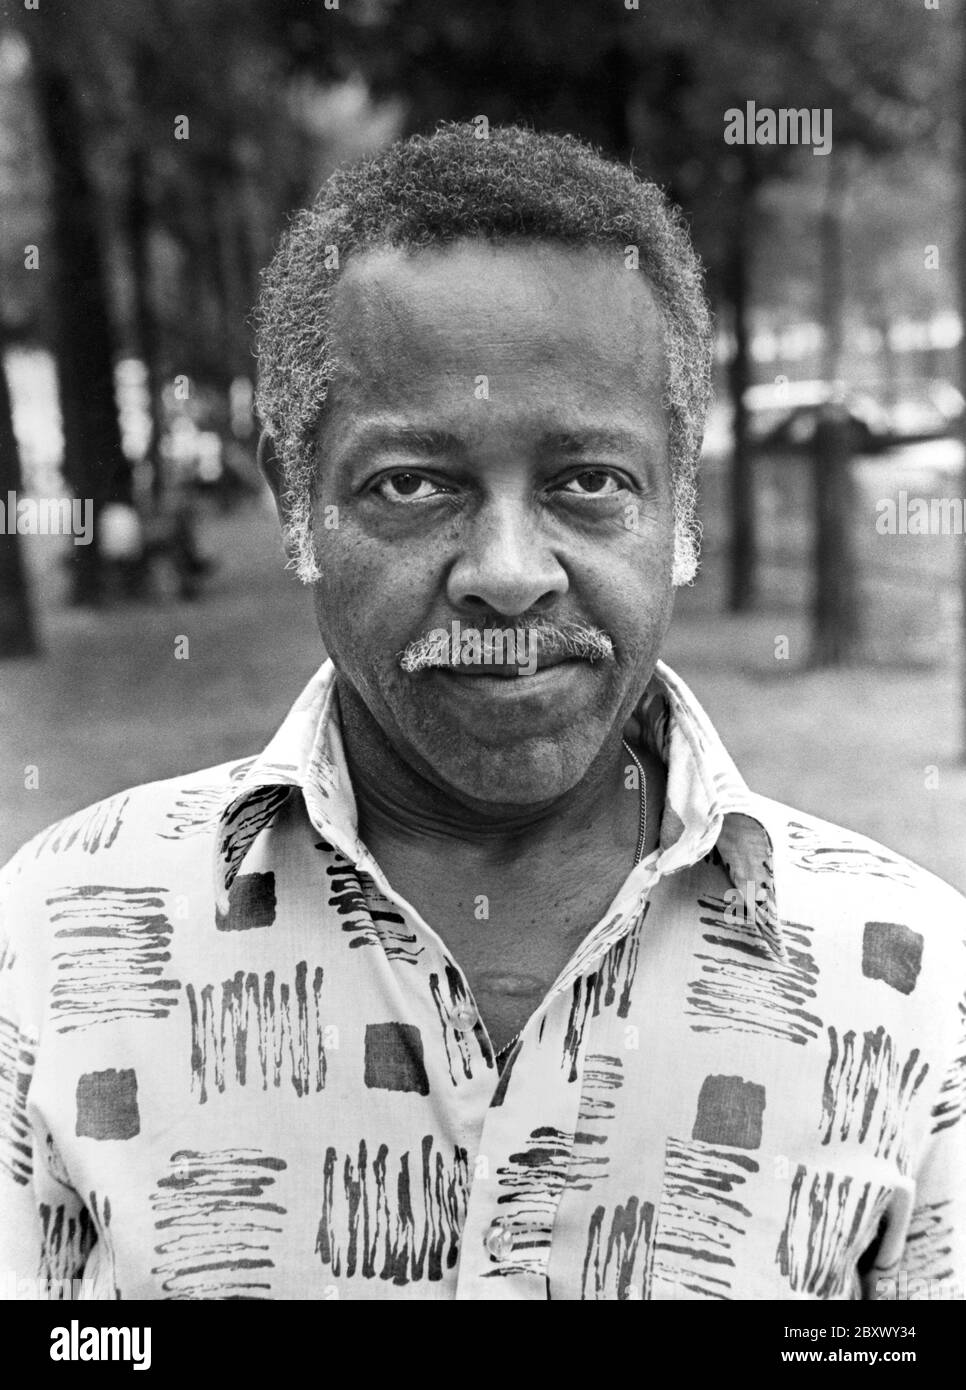 Black and white portrait of Jimmy 'Lover Man' Davis in Pairs, France, circa 1974. Jimmy wrote the song Lover Man that was performed and made famous by Billie Holiday. Stock Photo